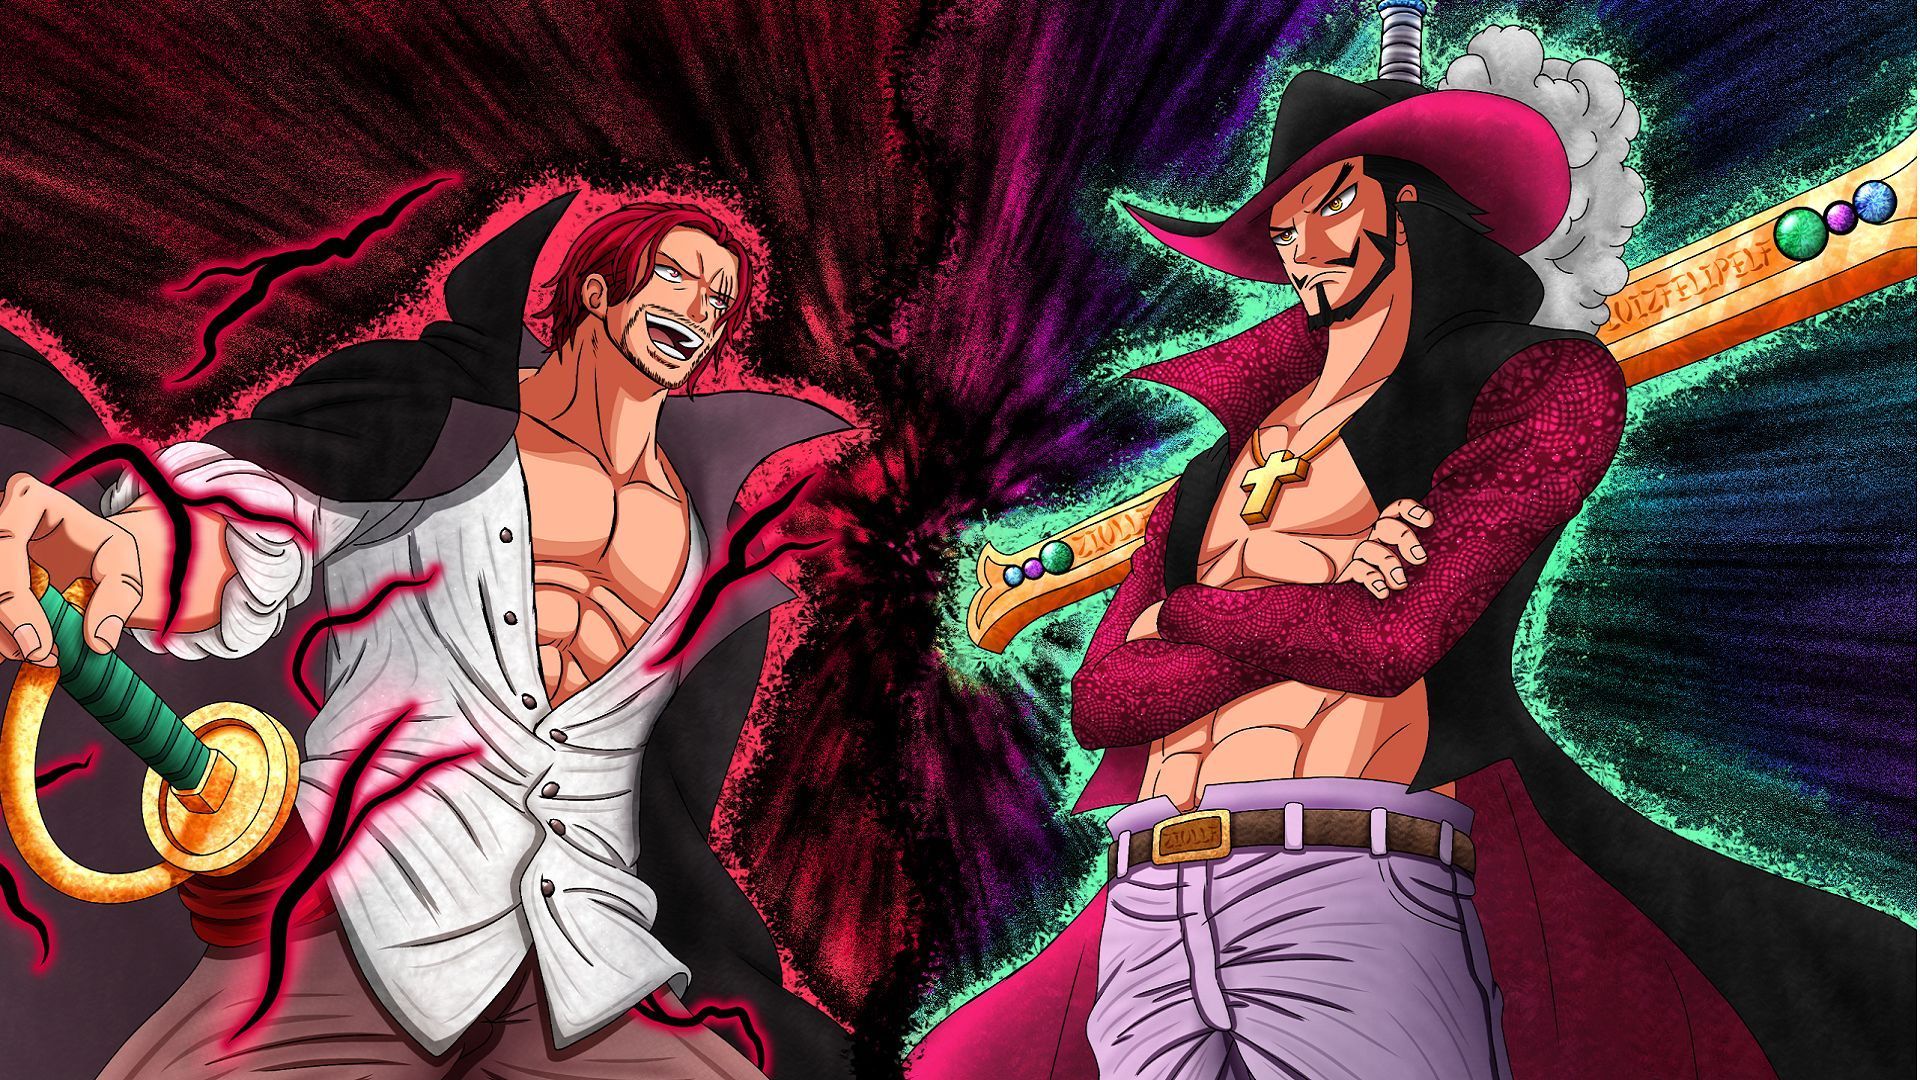 Shanks and Mihawk are two of the strongest and most iconic characters of One Piece (Image via Eiichiro Oda/Shueisha, One Piece)